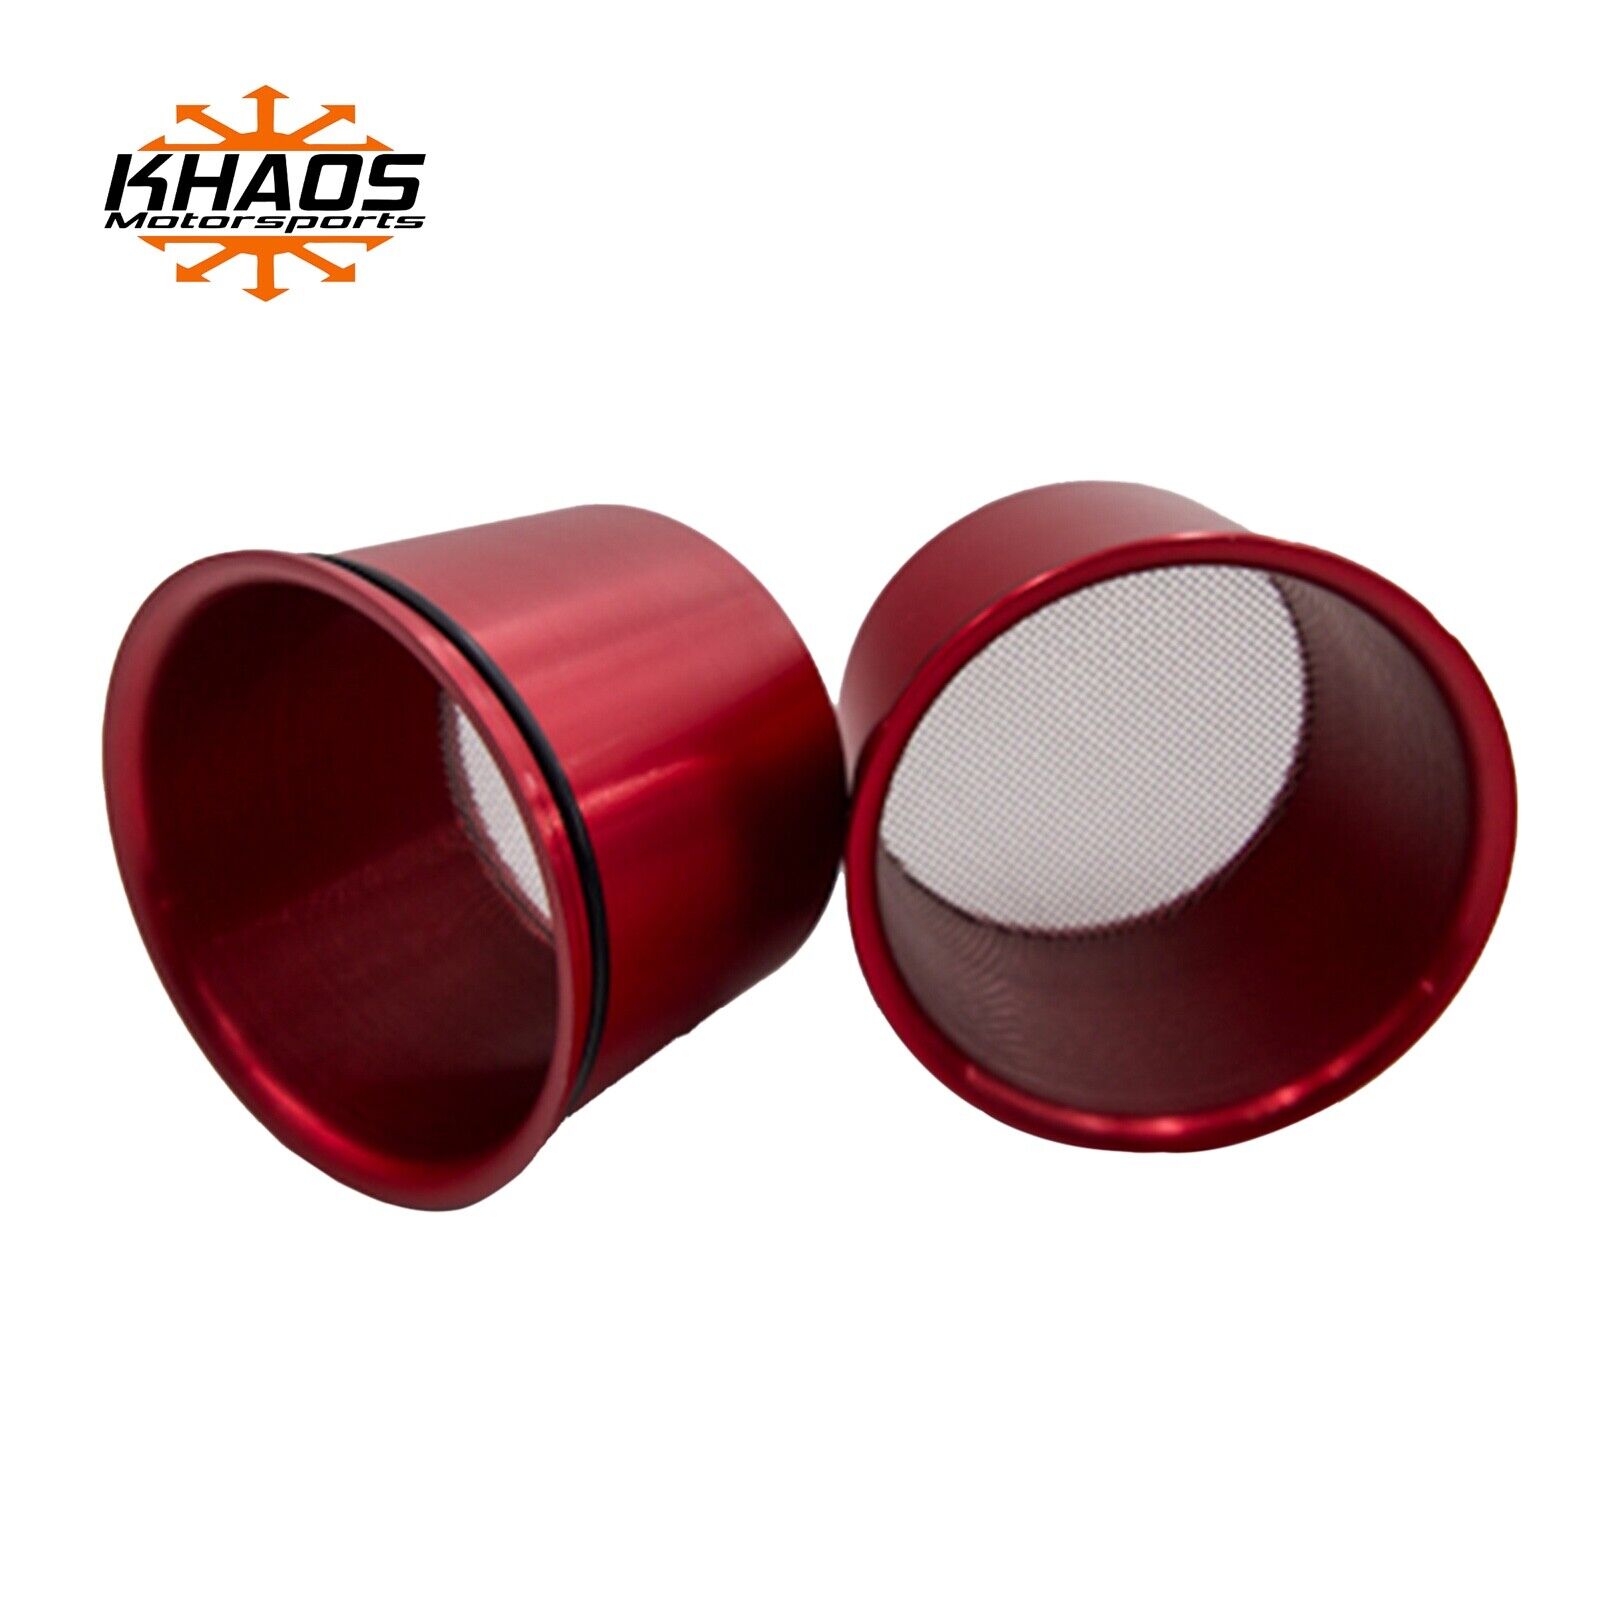 Dodge Challenger Head Light Intake Ring Anodized Red